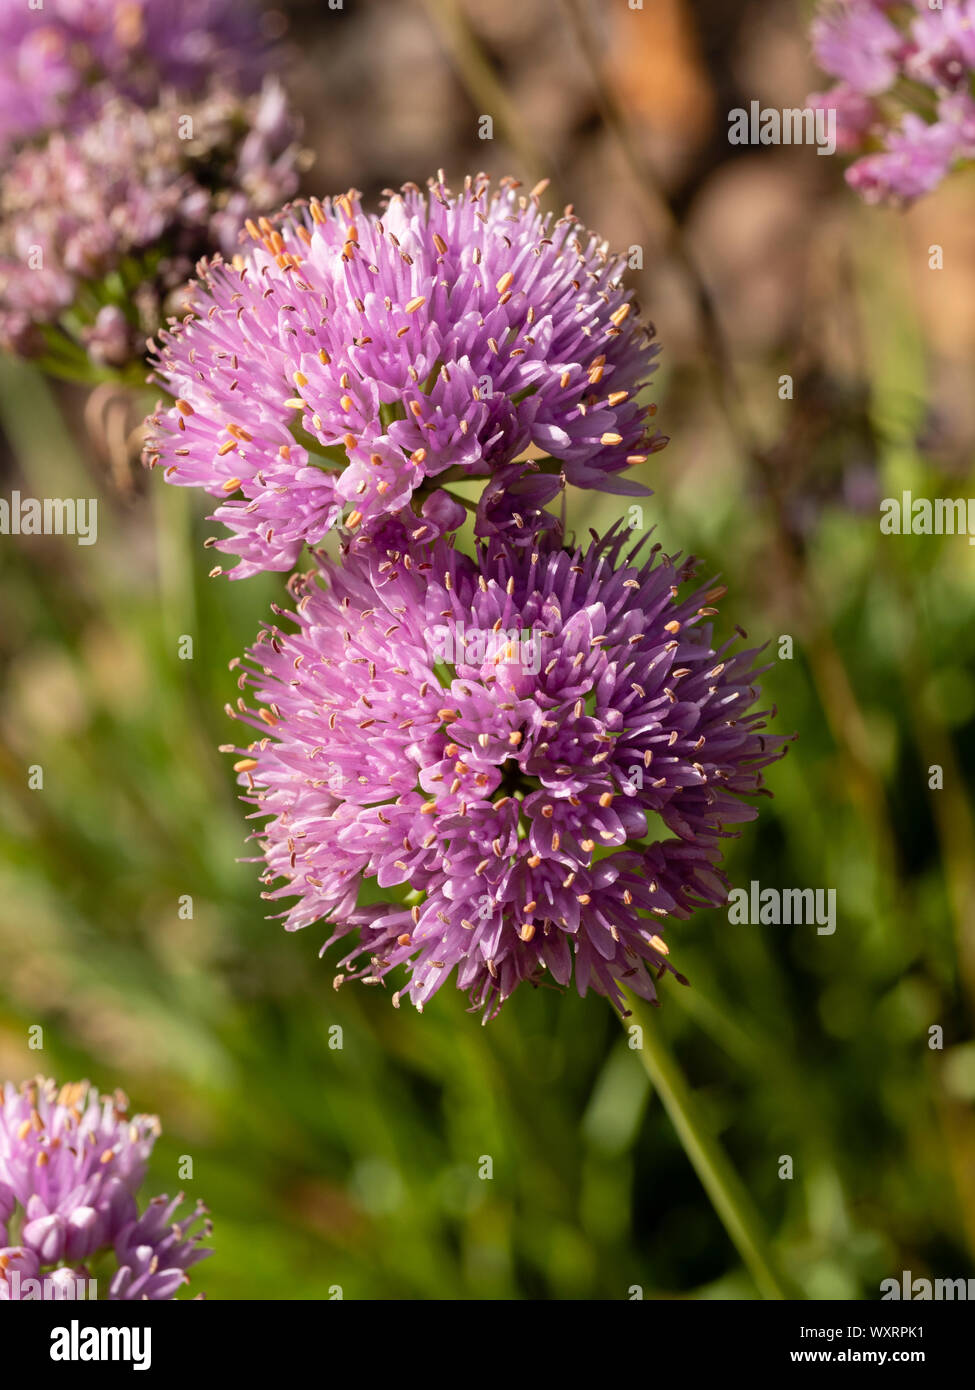 Spherical heads of pink, late summer flowers of the aging chive, Allium senescens Stock Photo